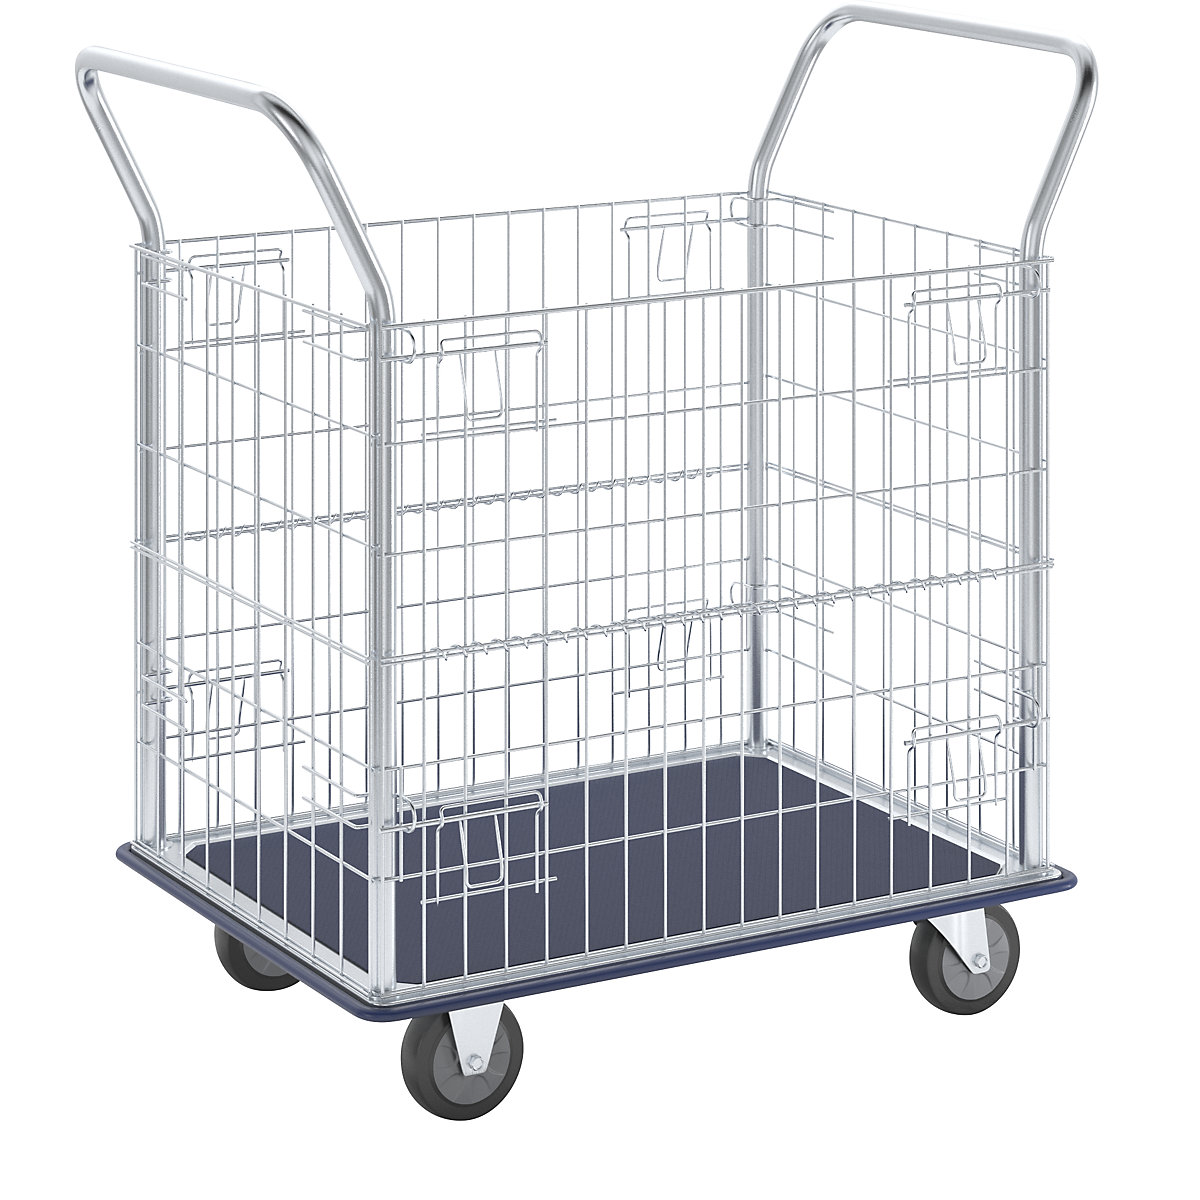 Mesh trolley, zinc plated mesh sides, with stainless steel push handles, max. load 370 kg-3